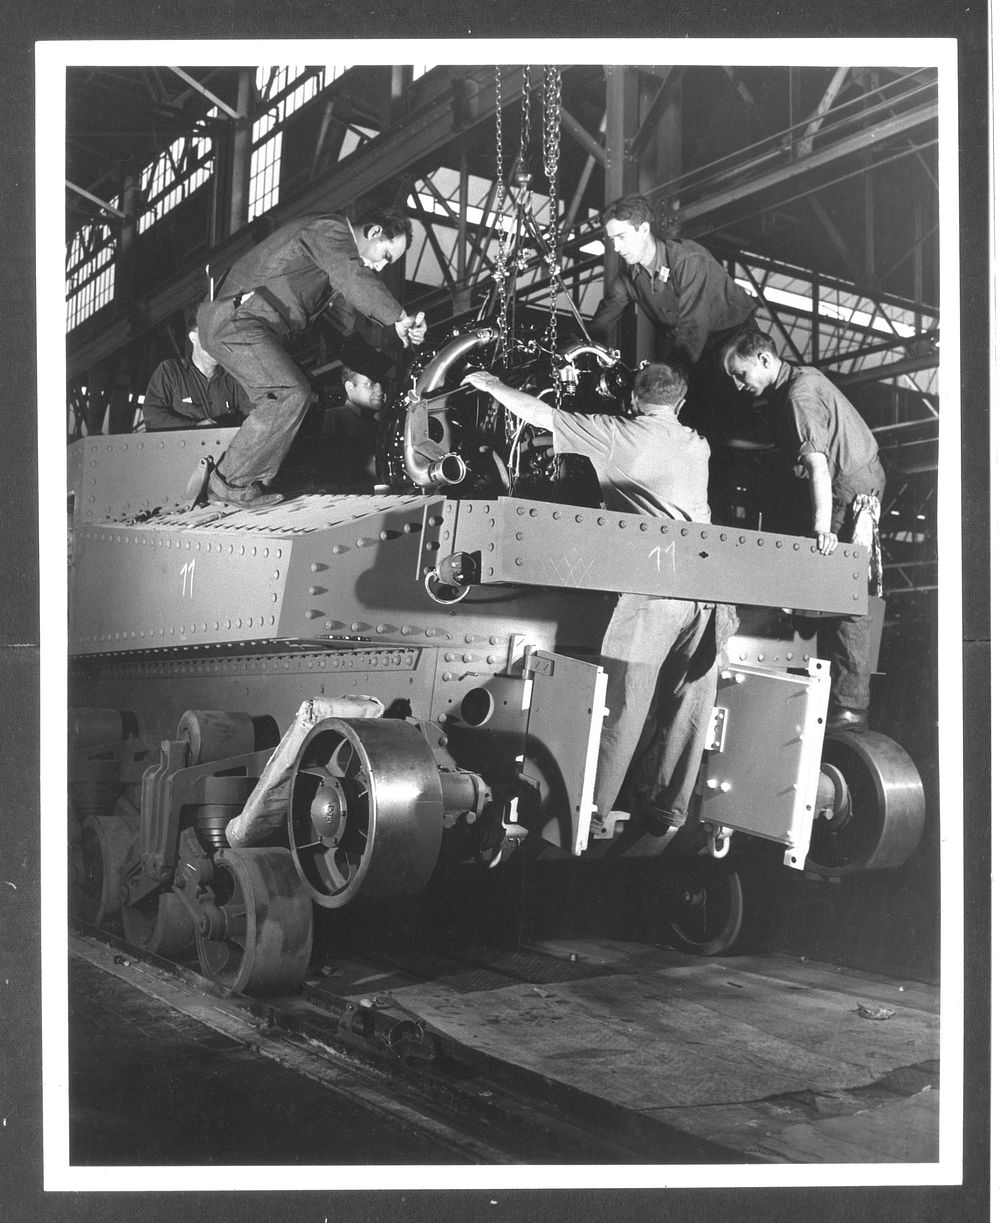 Chrysler tank arsenal. Installing the power plant is a ticklish operation. These workers are lowering a 400 horsepower…